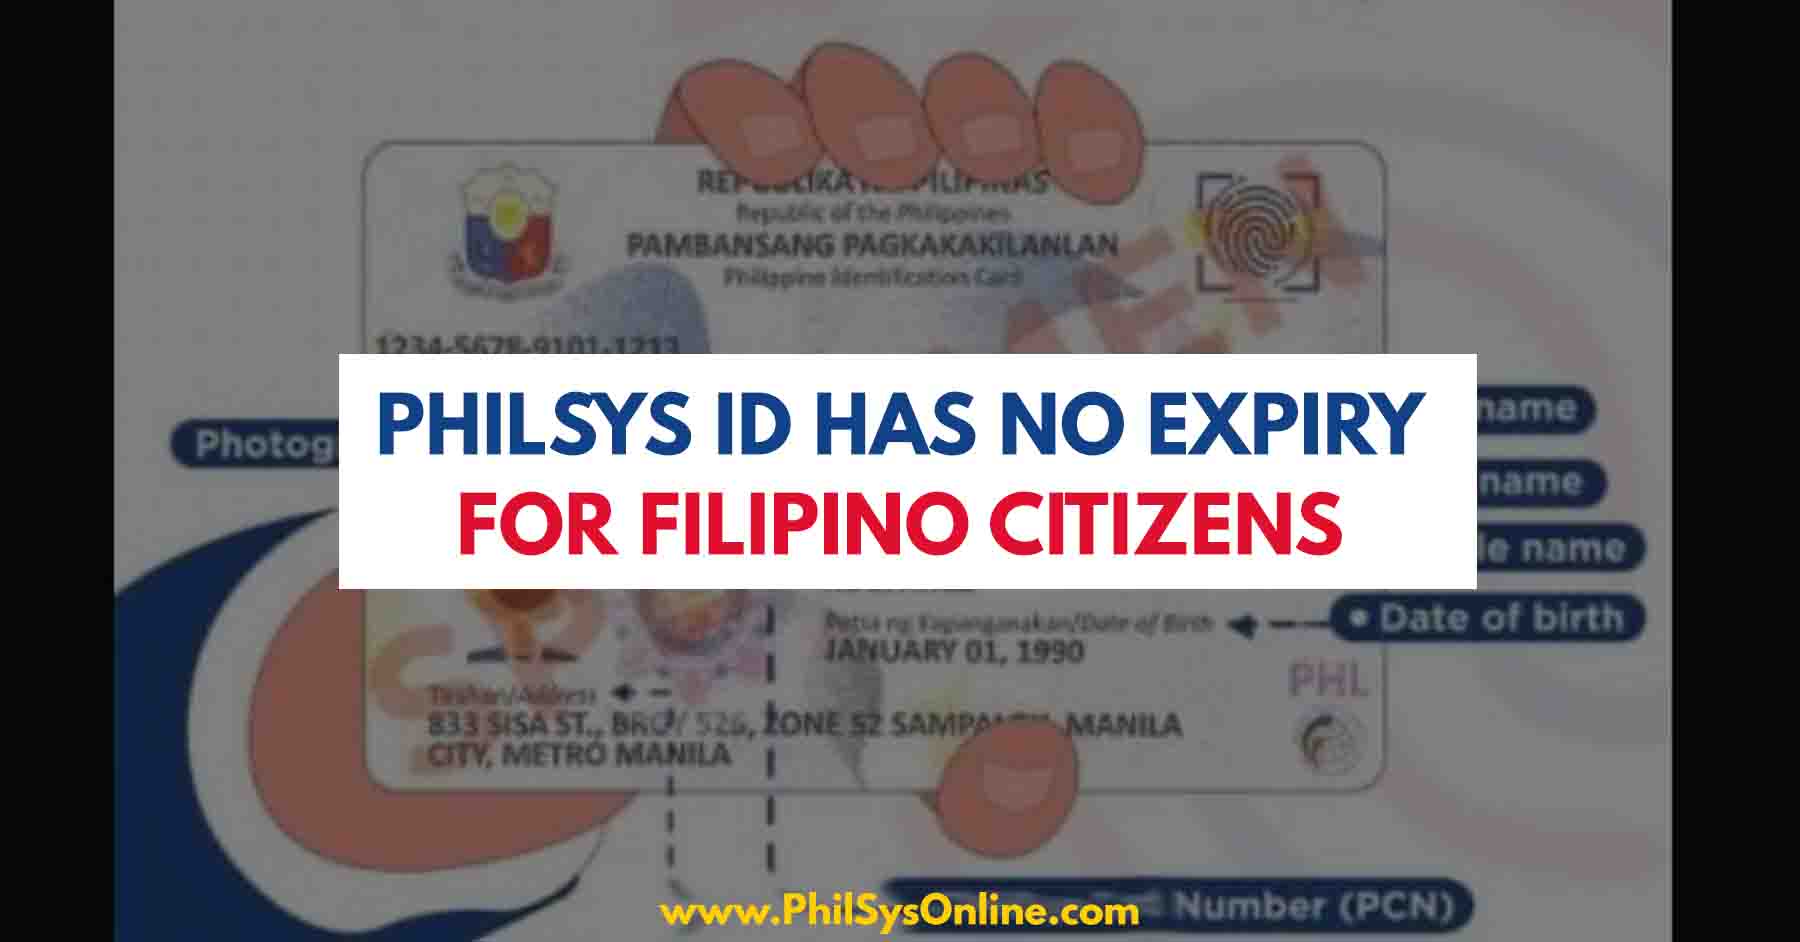 philid has no expiry for filipinos